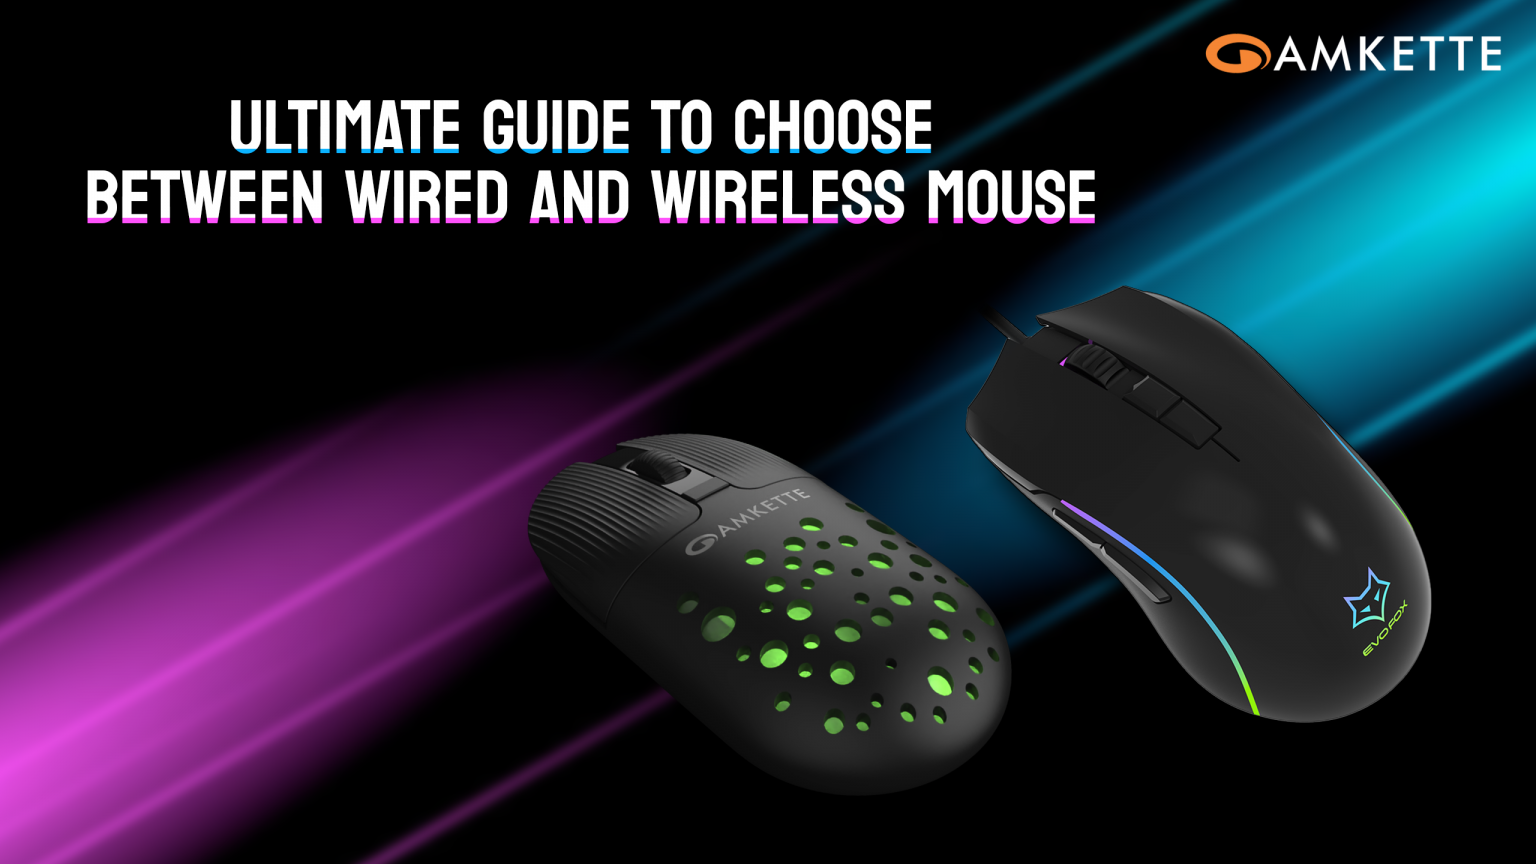 Wired Vs Wireless Mouse? Which one to go for? Let's Find Out